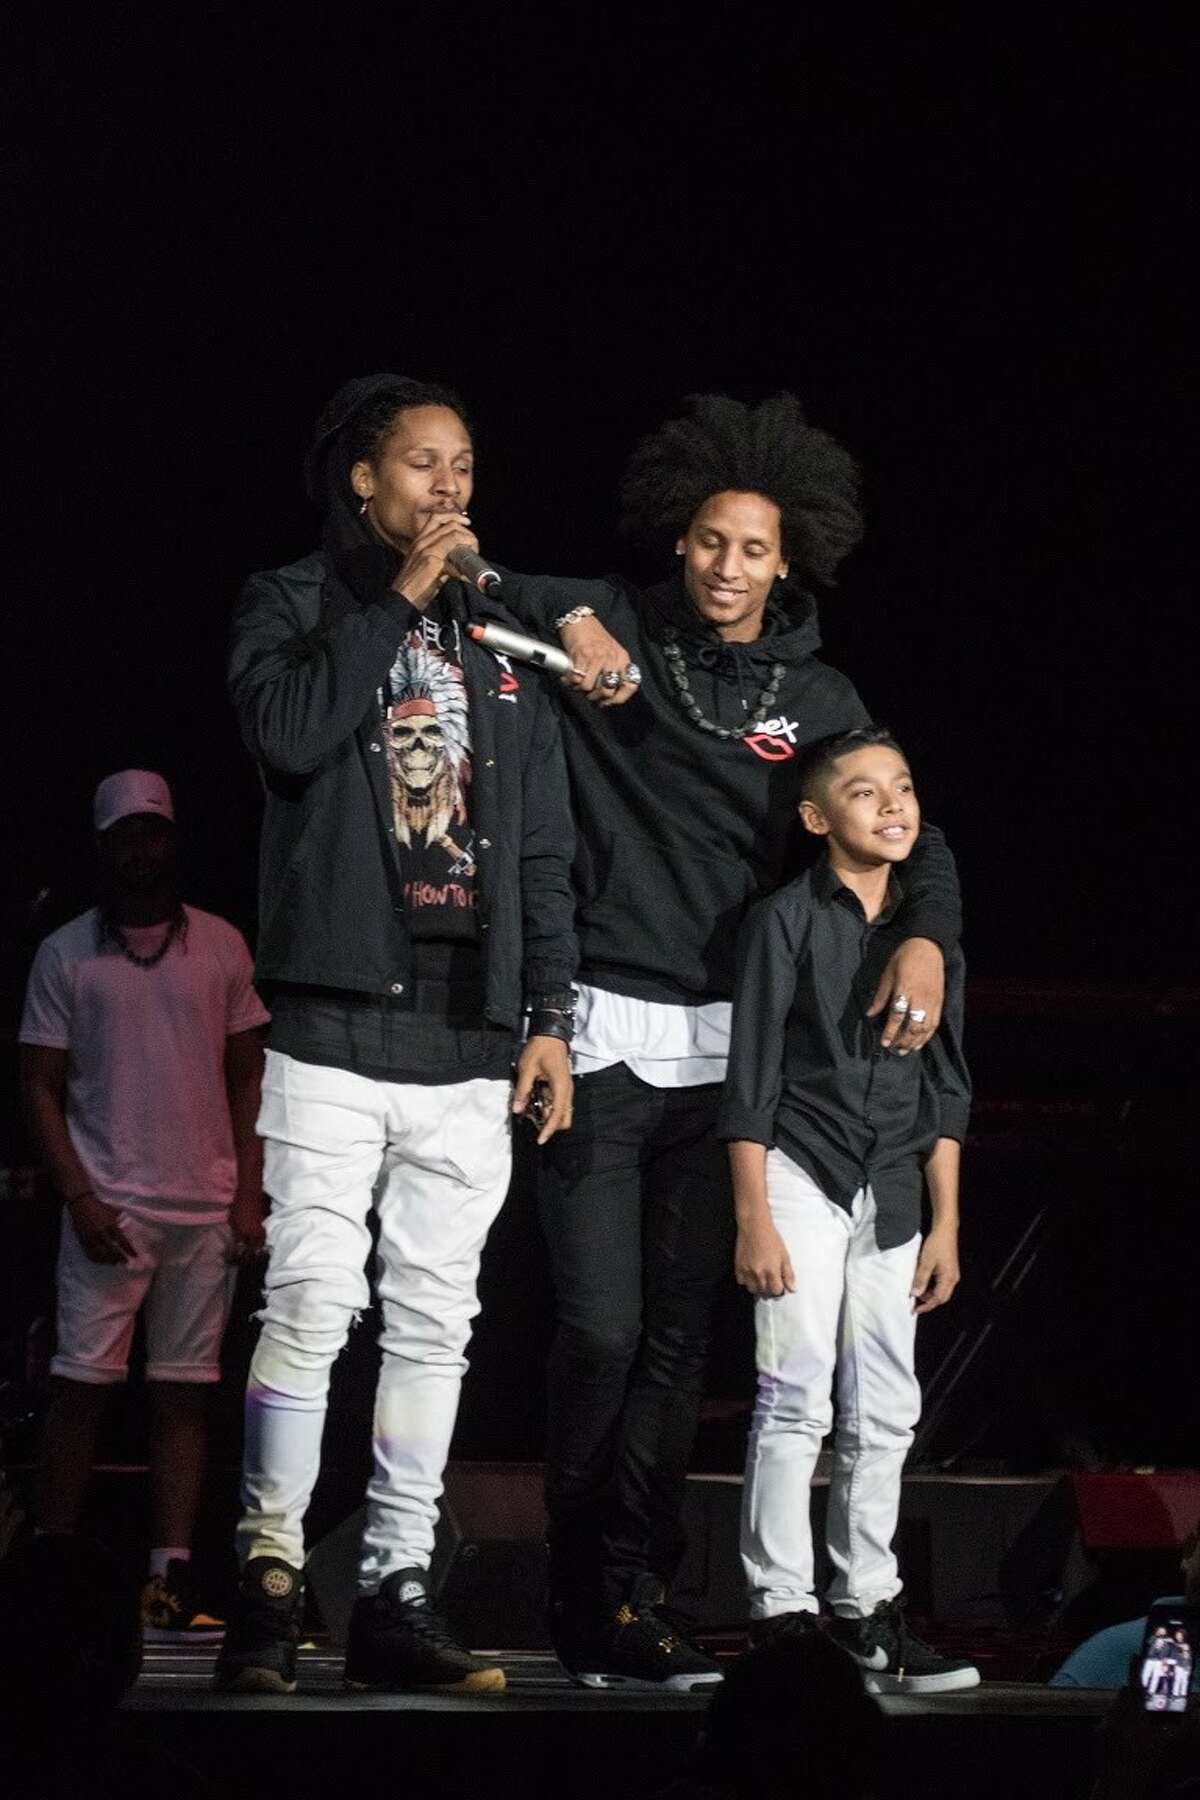 Gilbert Rodriguez shares the stage with his idols Les Twins during Summer Jam 2017 at the LEA.